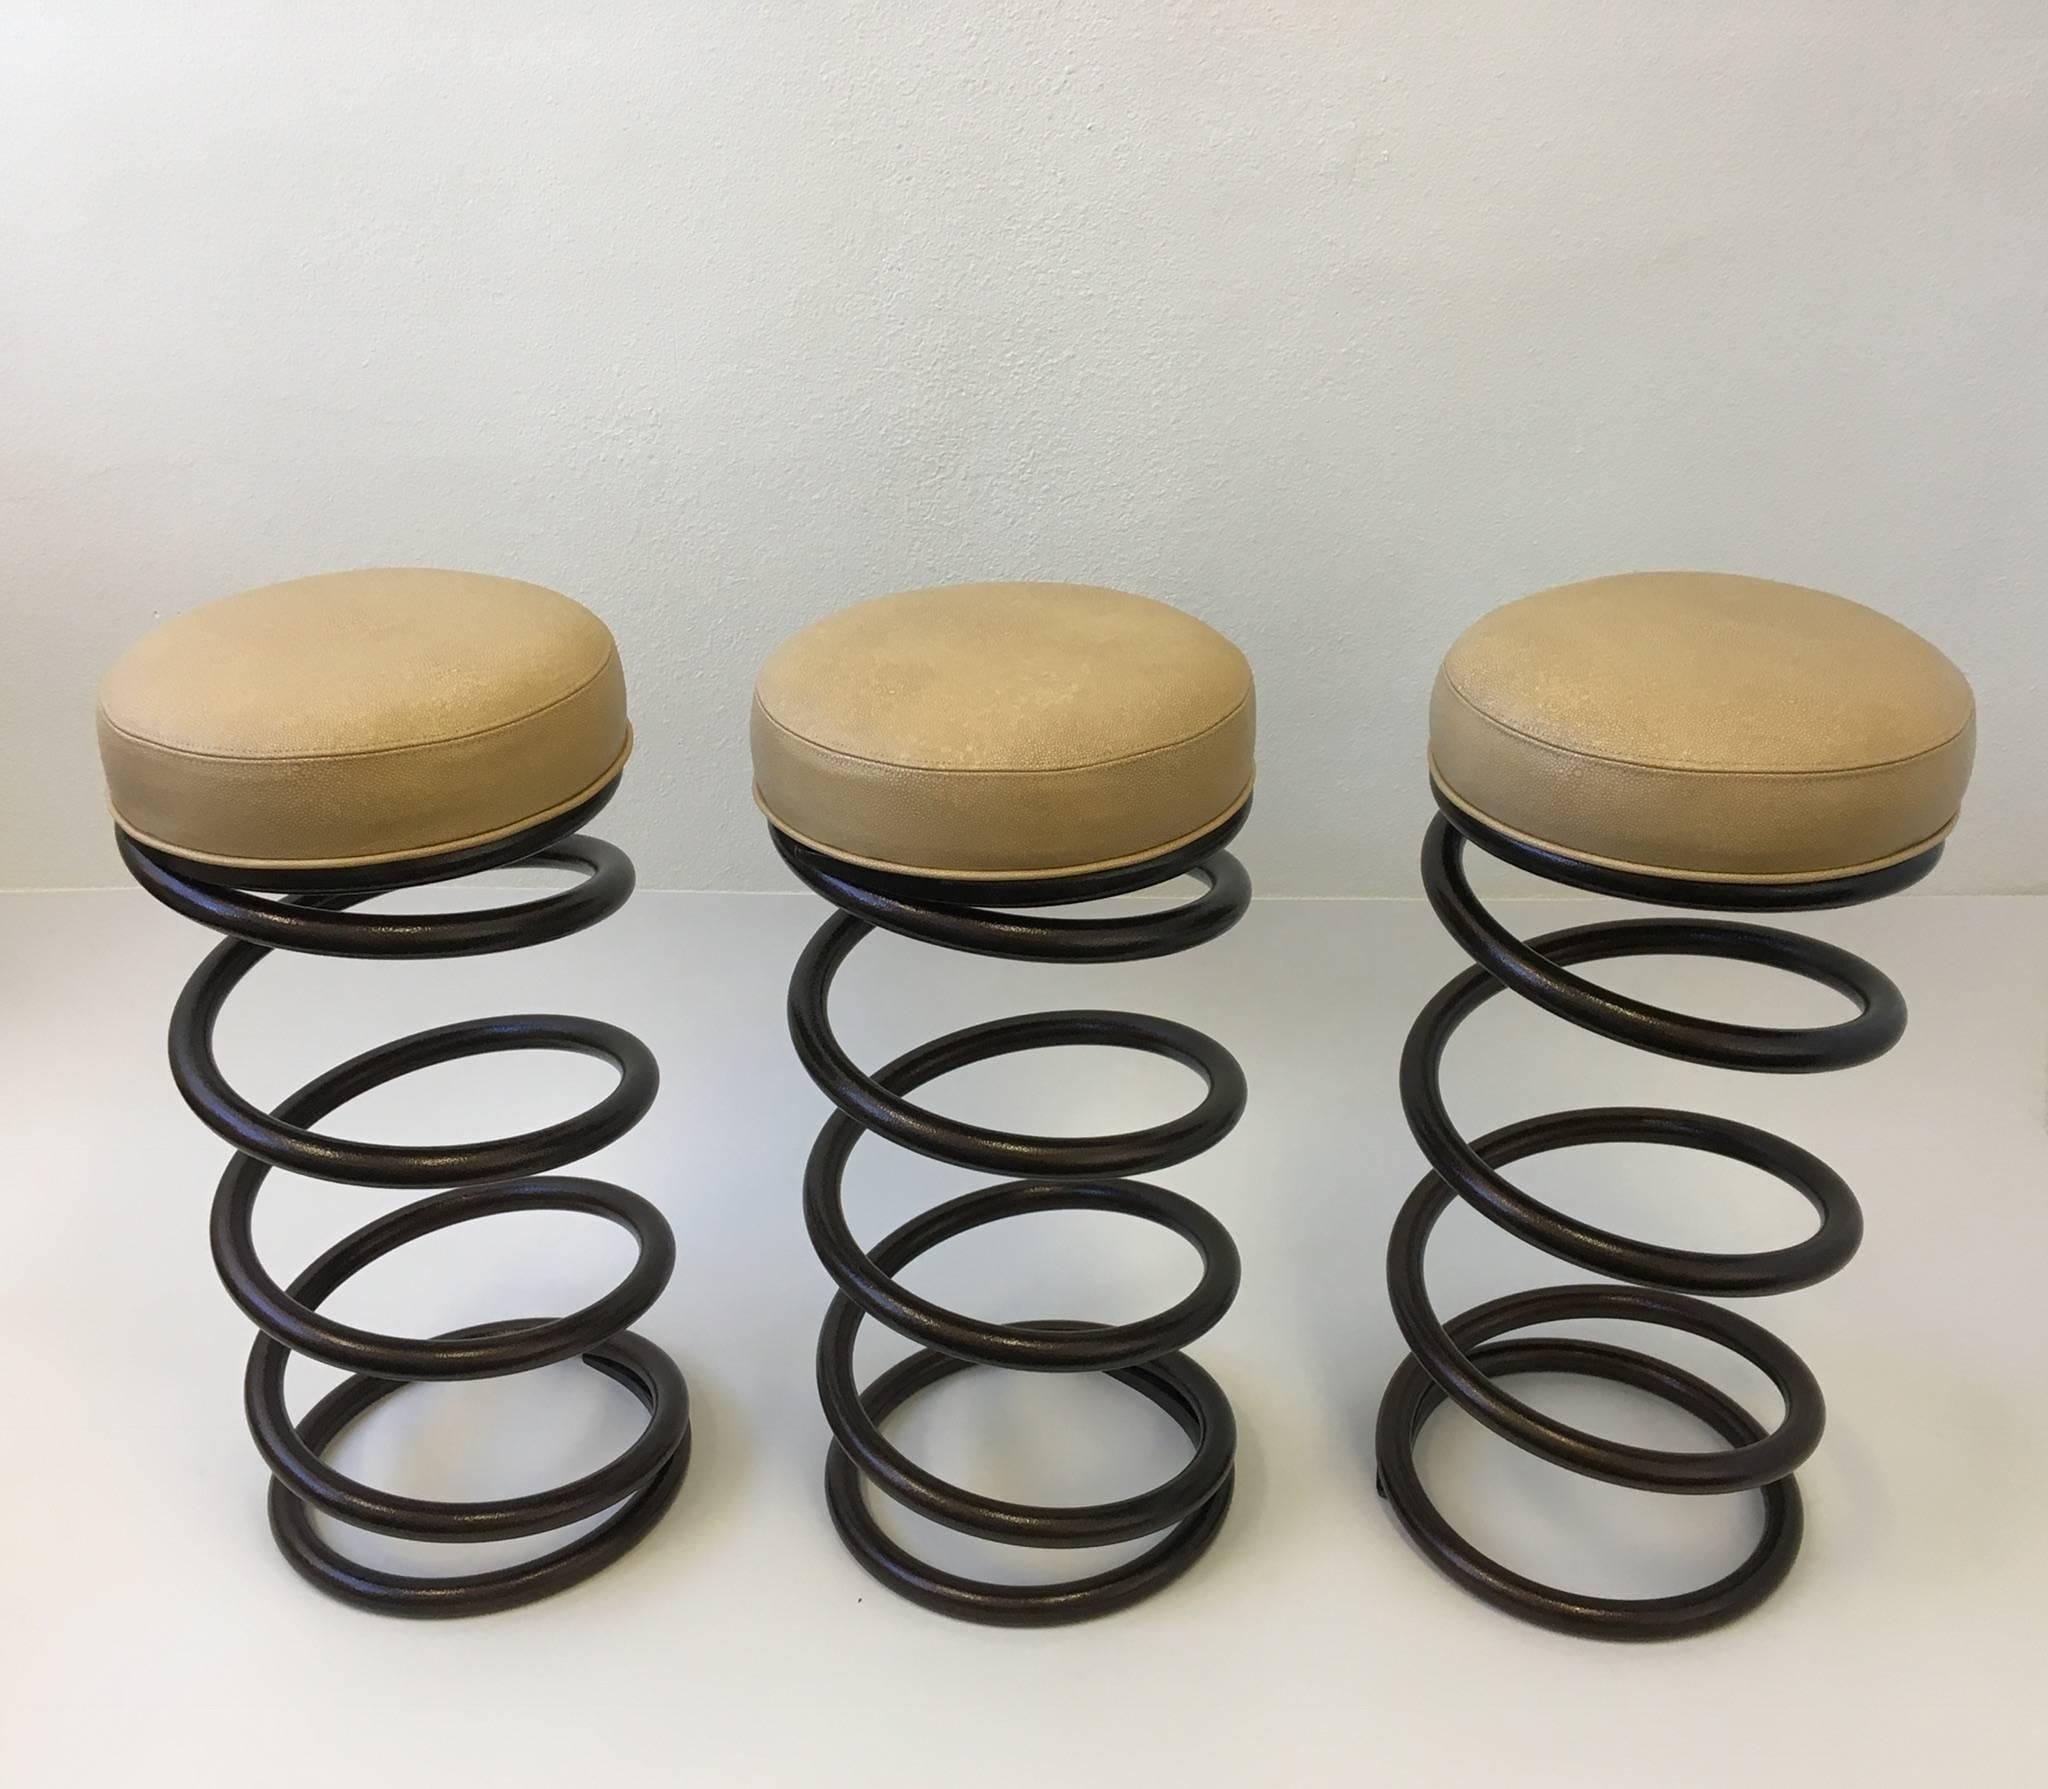 A set of three rare solid steel spring bar stools the seats have been newly recovered in cream leather embossed with a shagreen pattern. The bar stools have been newly restored. The spring has been powder coated with a brown copper tone orange peel